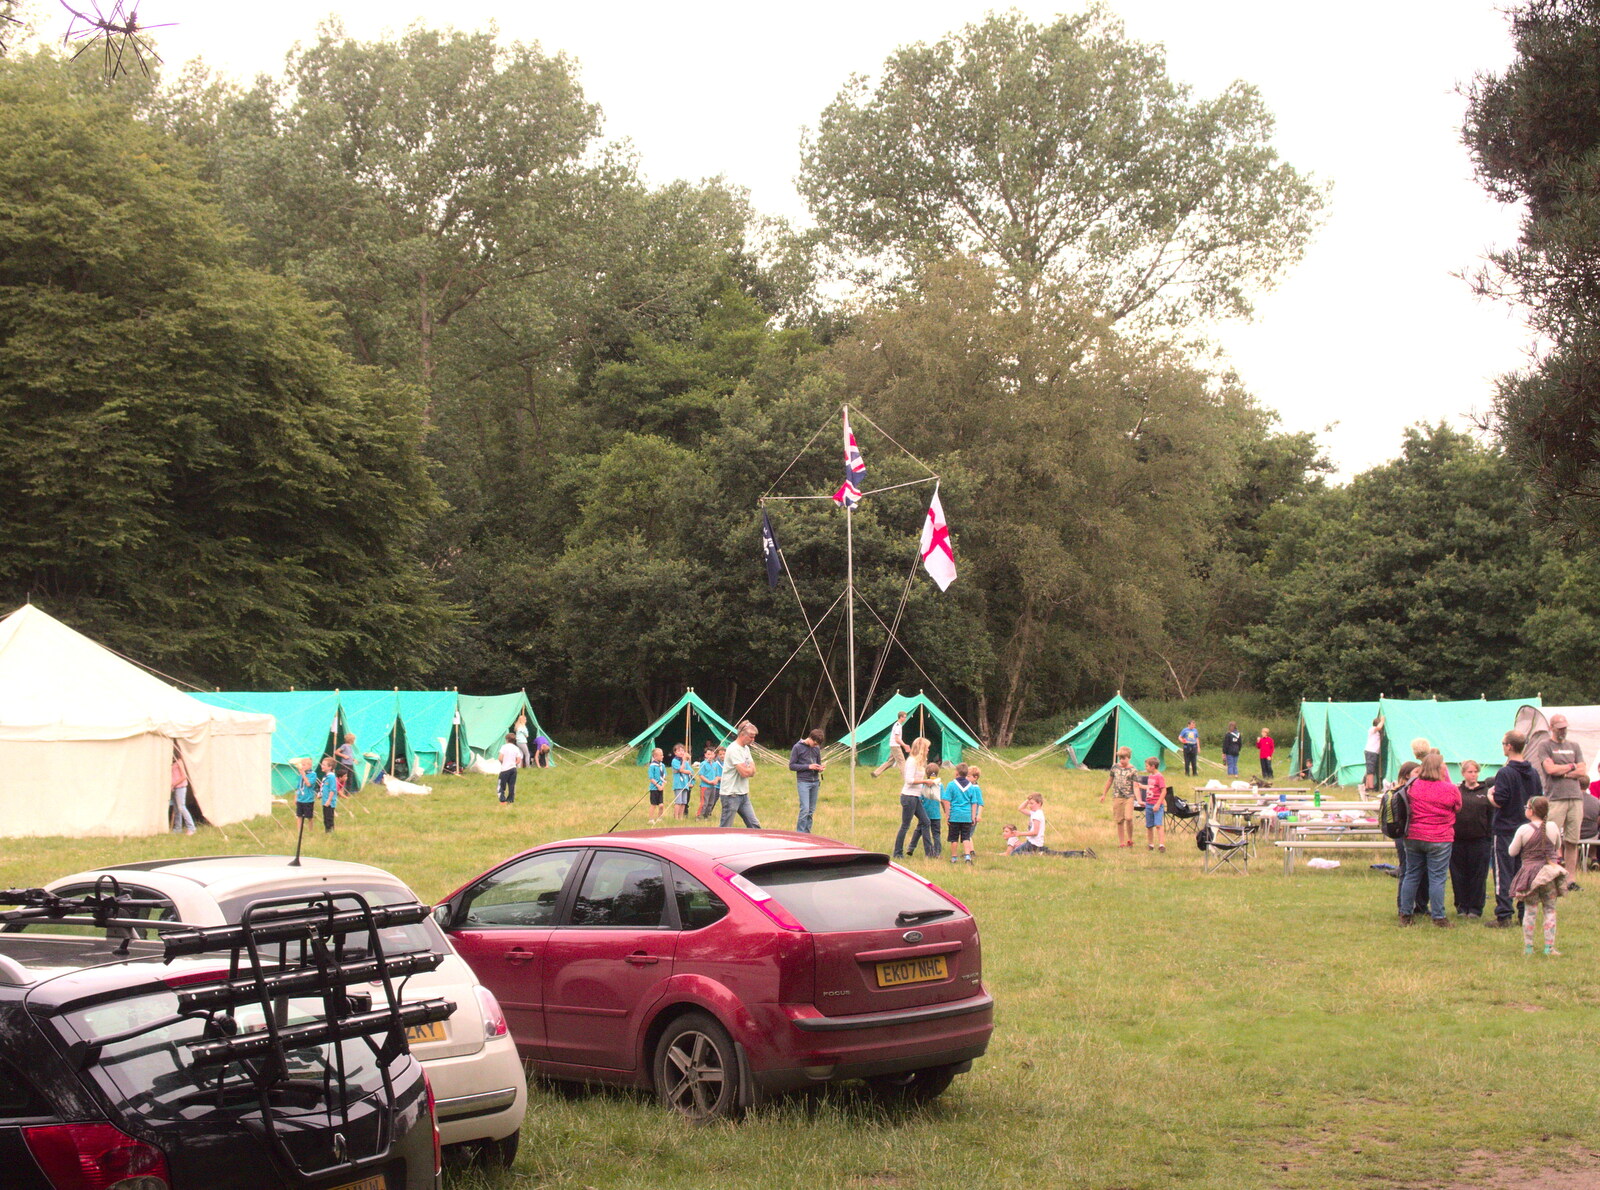 Tent City from Fred's Camping, Curry and the Closing of B&Q, Thetford, Diss  and Ipswich - 16th July 2016